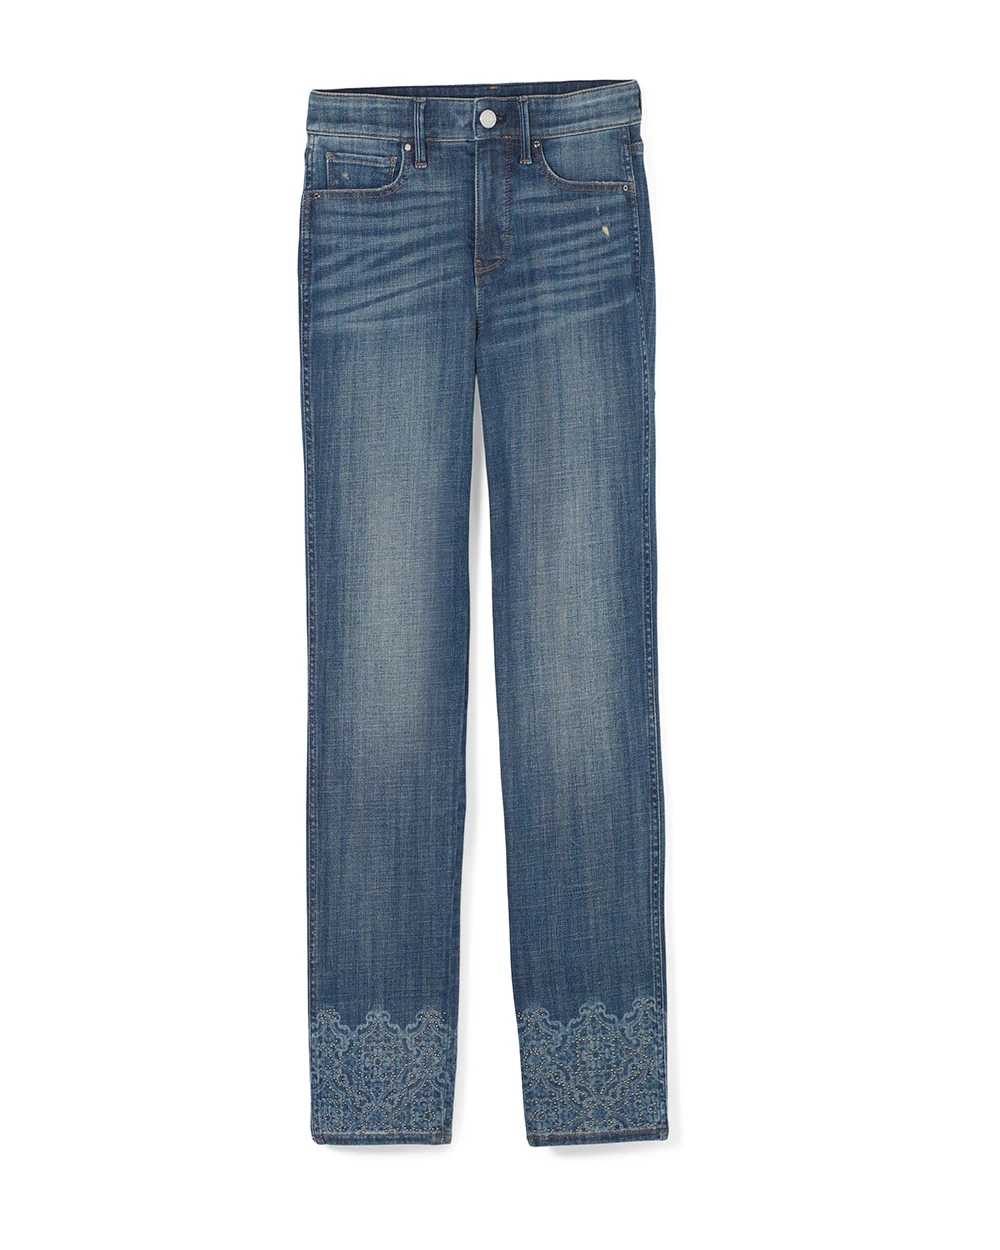 Petite High Rise Everyday Soft Denim  Beaded Hem Jeans click to view larger image.